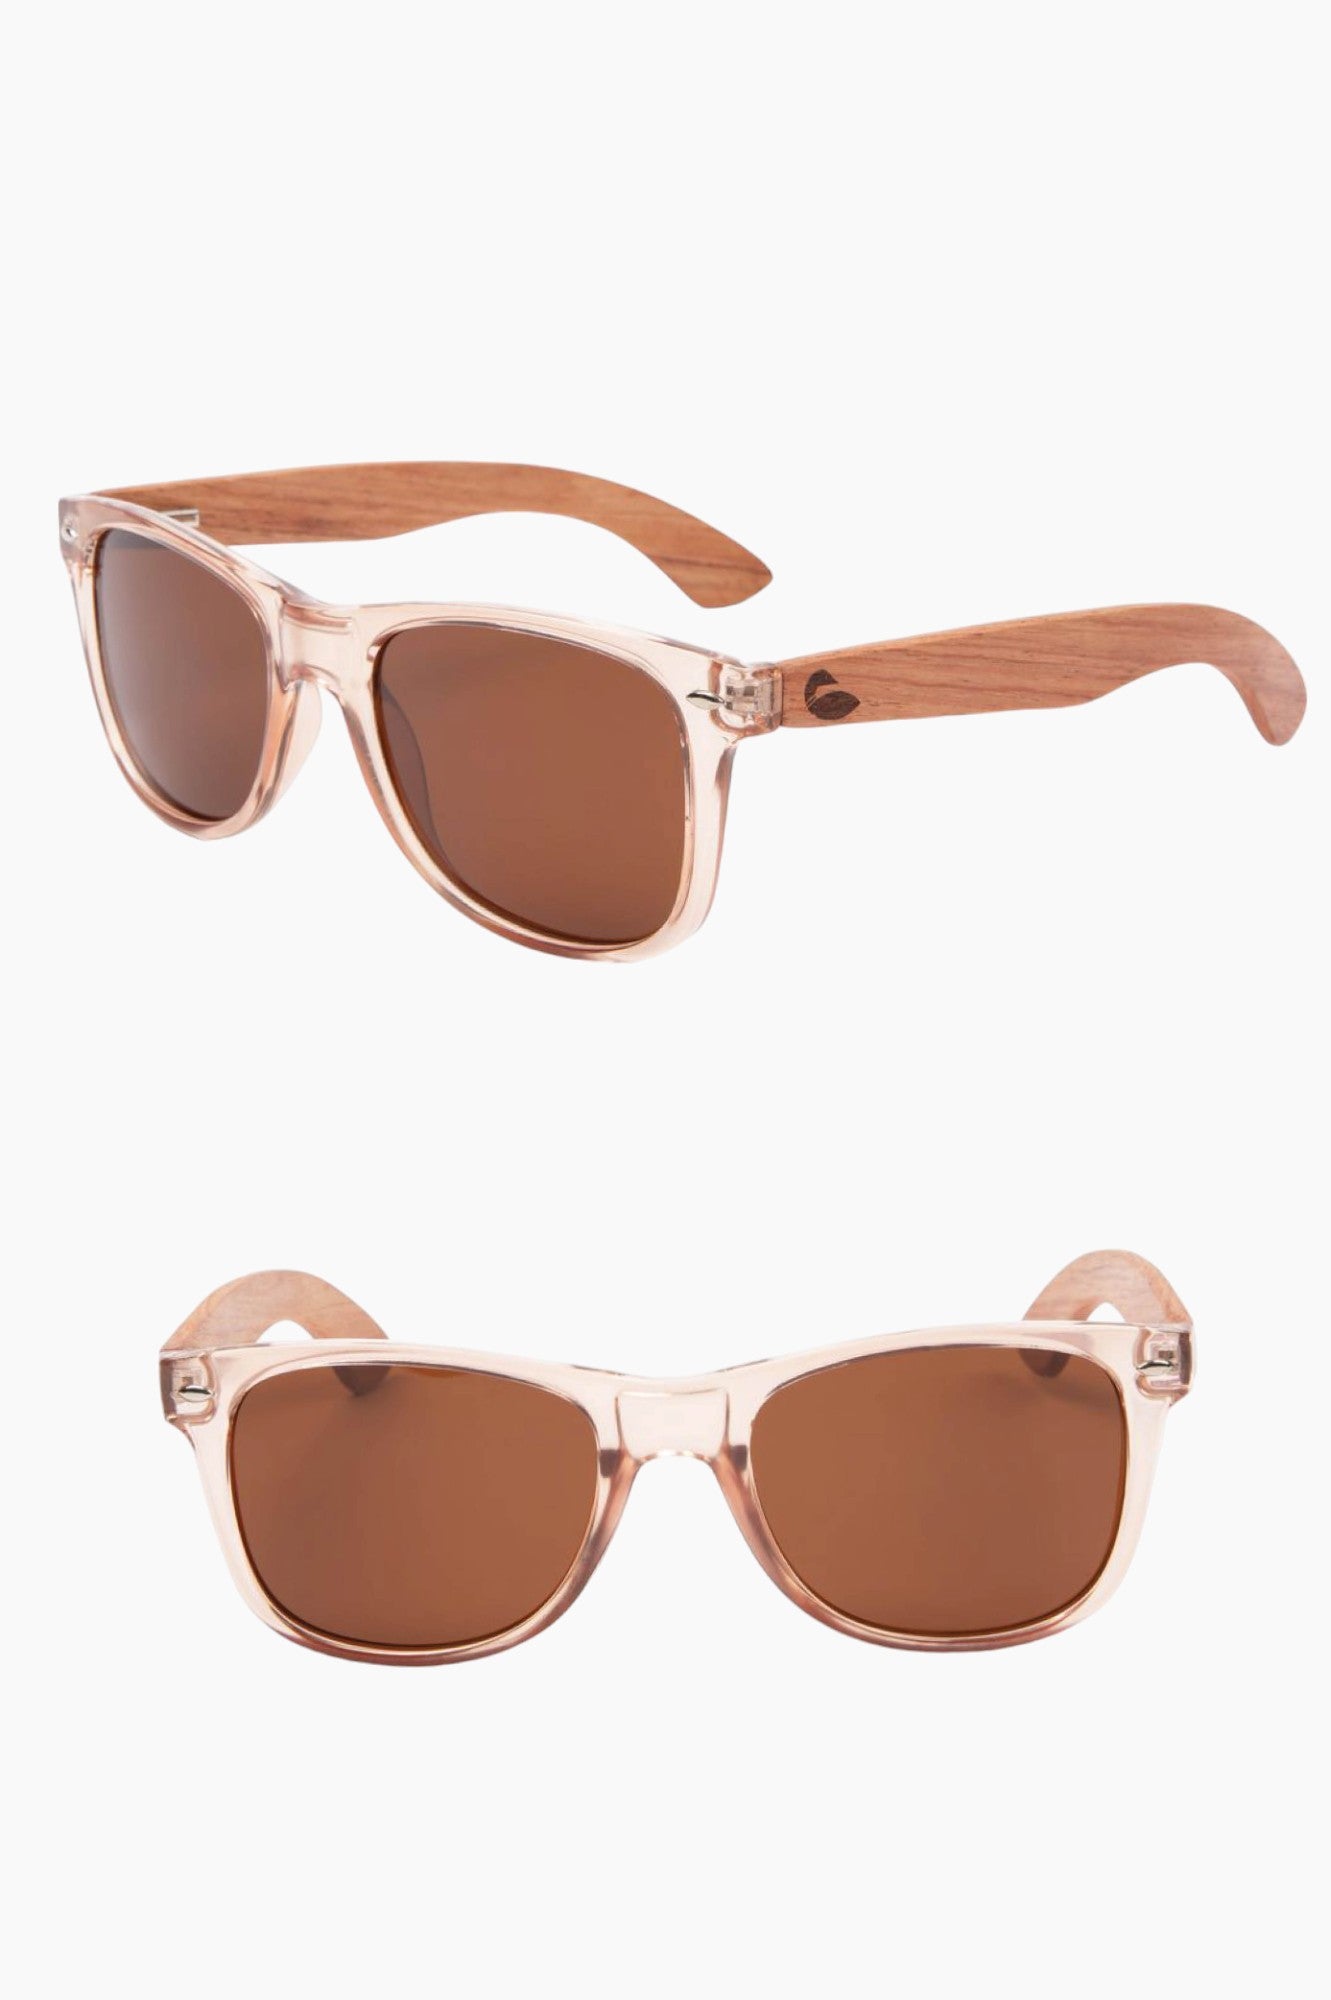 Clear, salmon-tinged framed sunglasses with wood temple pieces and loon logo.